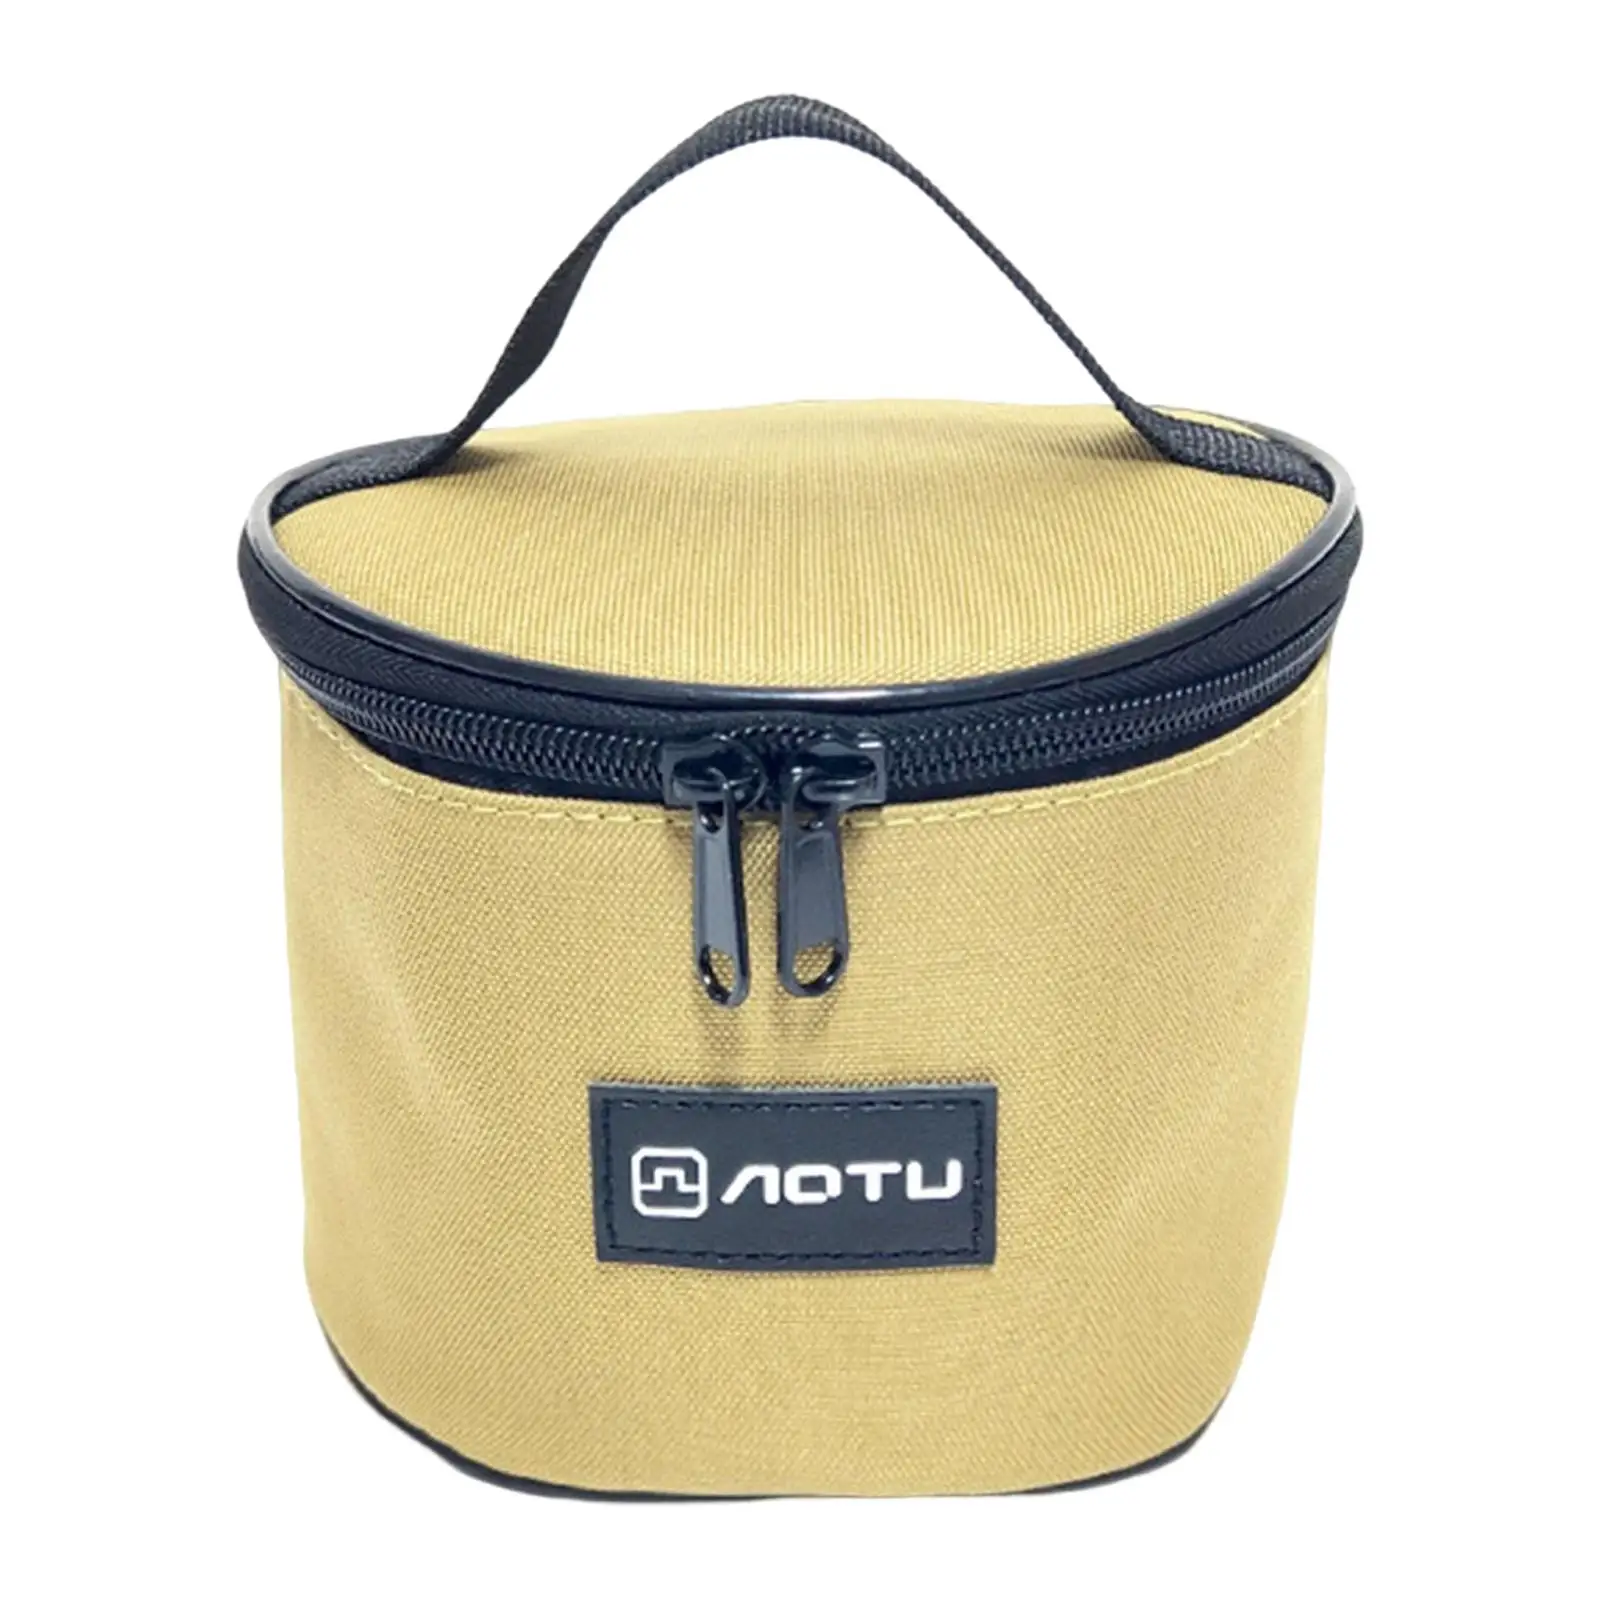 Oxford Bowl Storage Bag with Handle Waterproof Organizer Hanging Carry Case Camping Outdoor Pouch for Picnic Travel Fishing